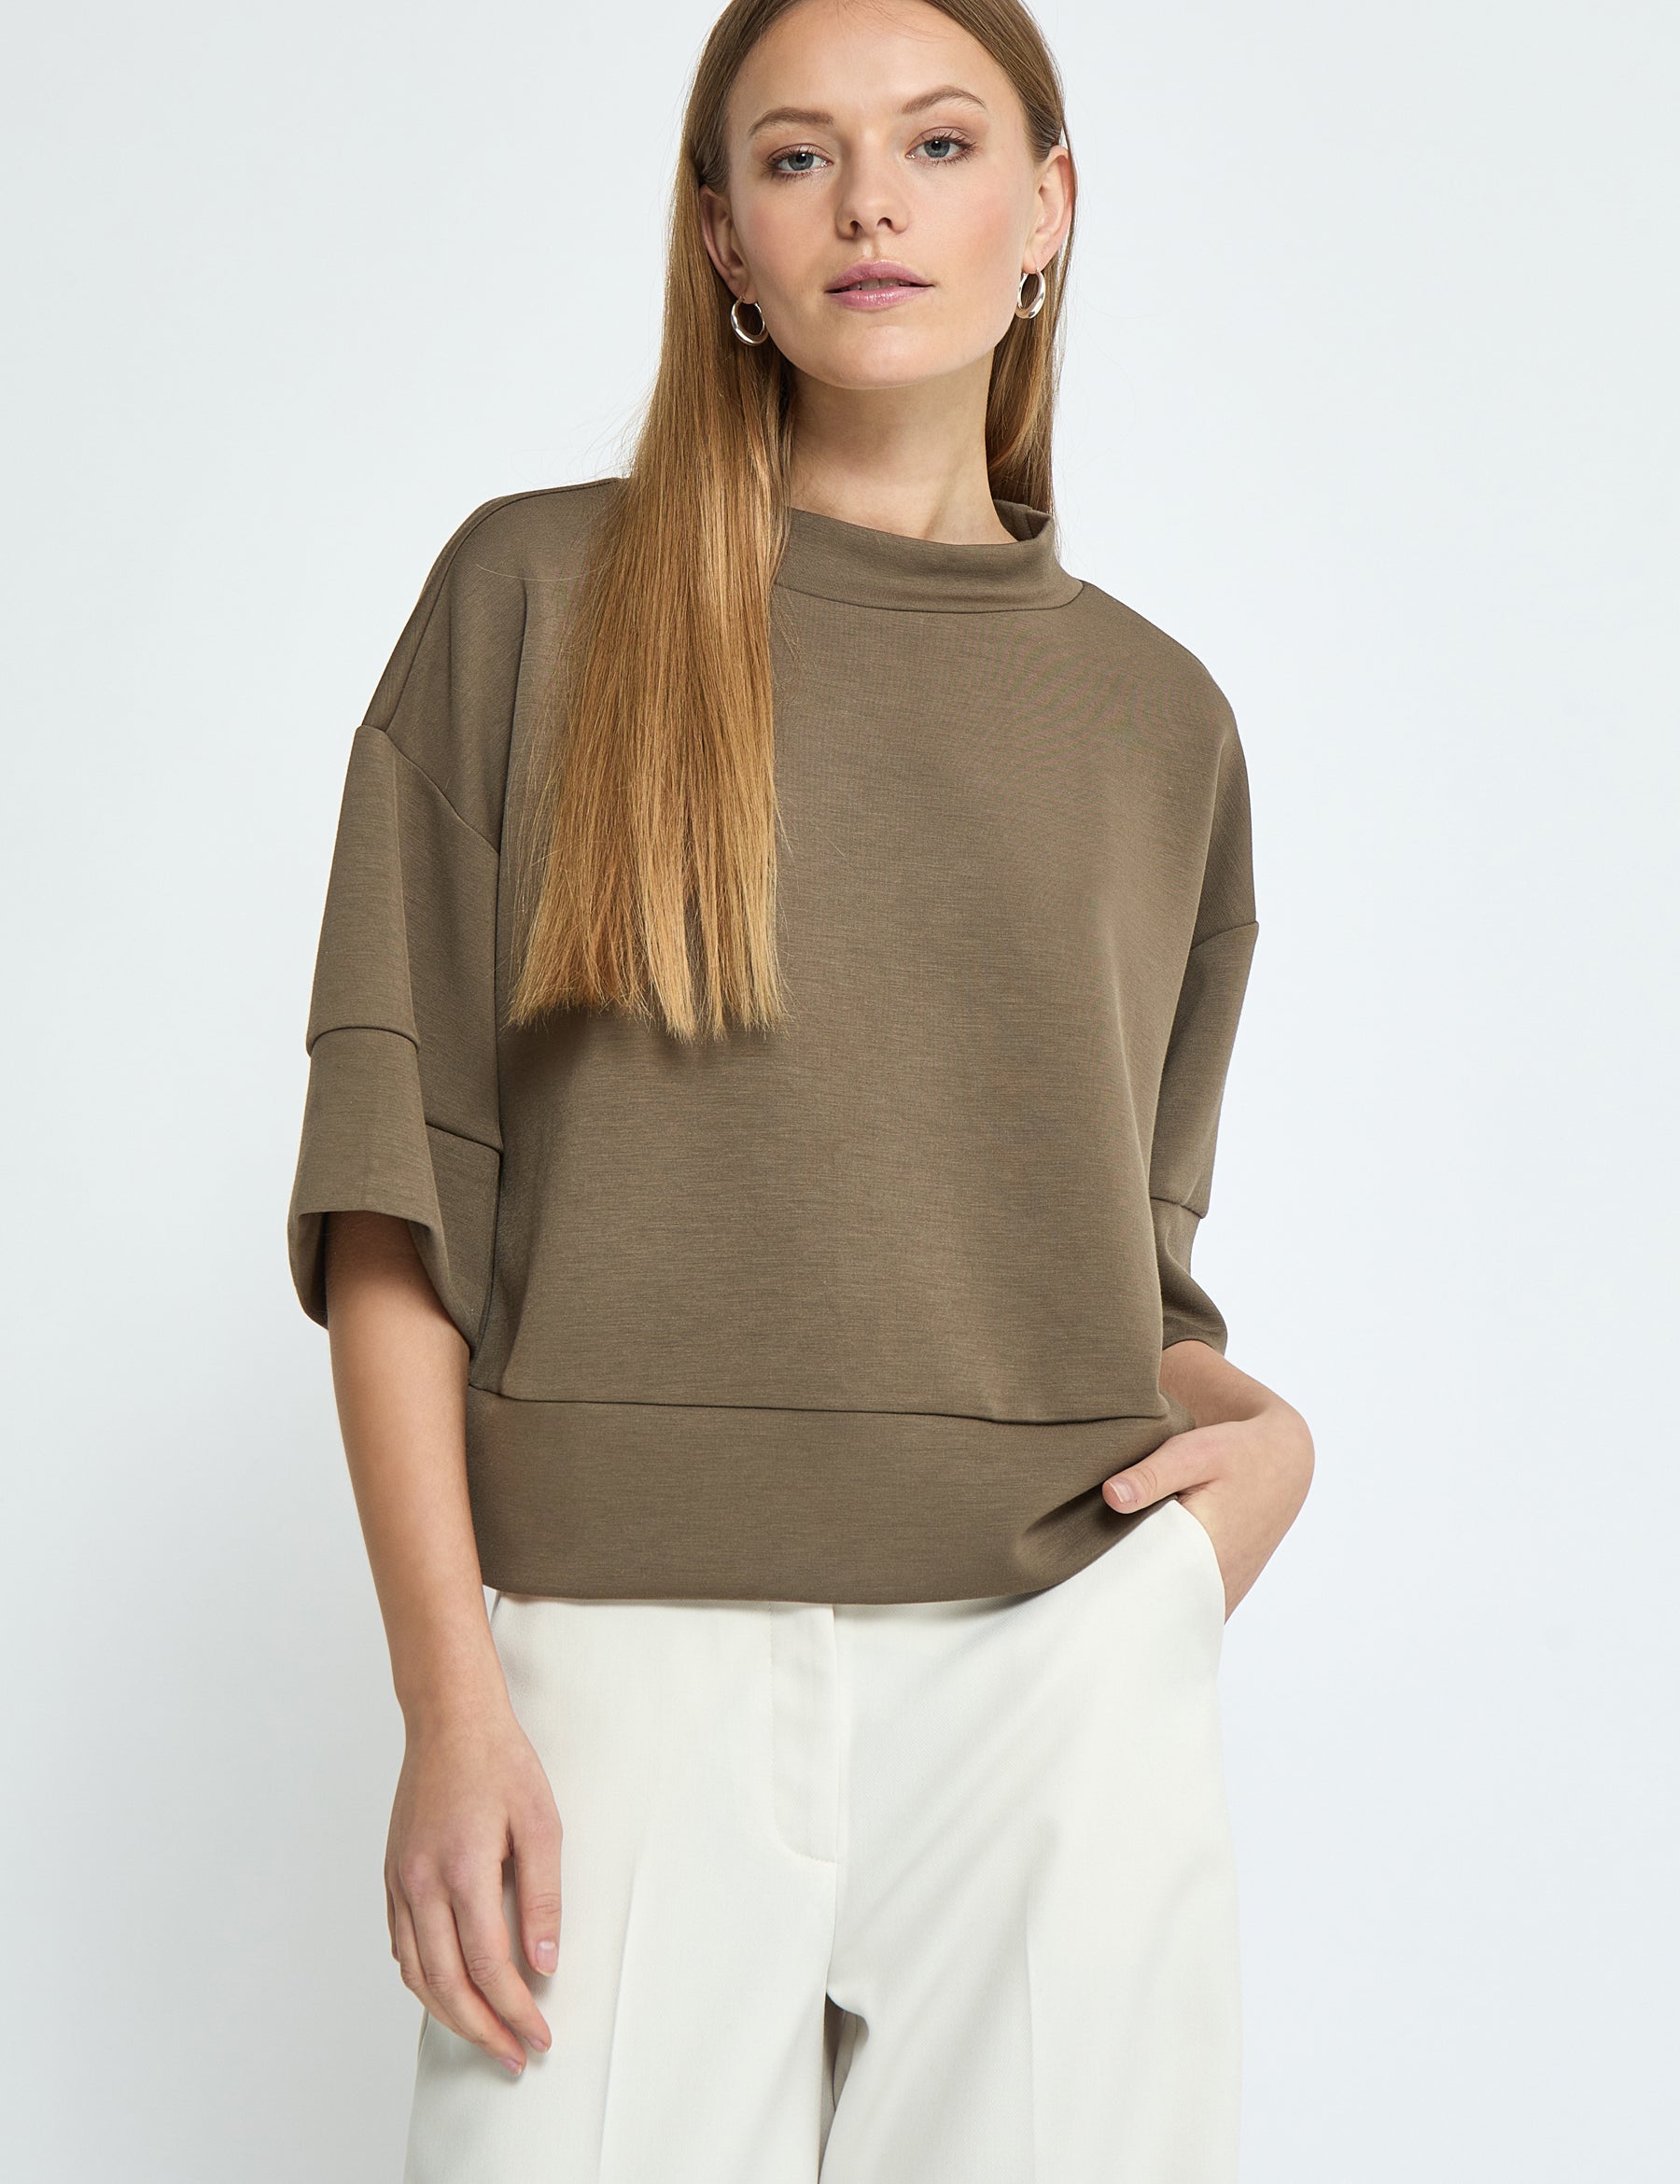 Peppercorn PCDicette Sweat Blouse 5998 Canteen Brown